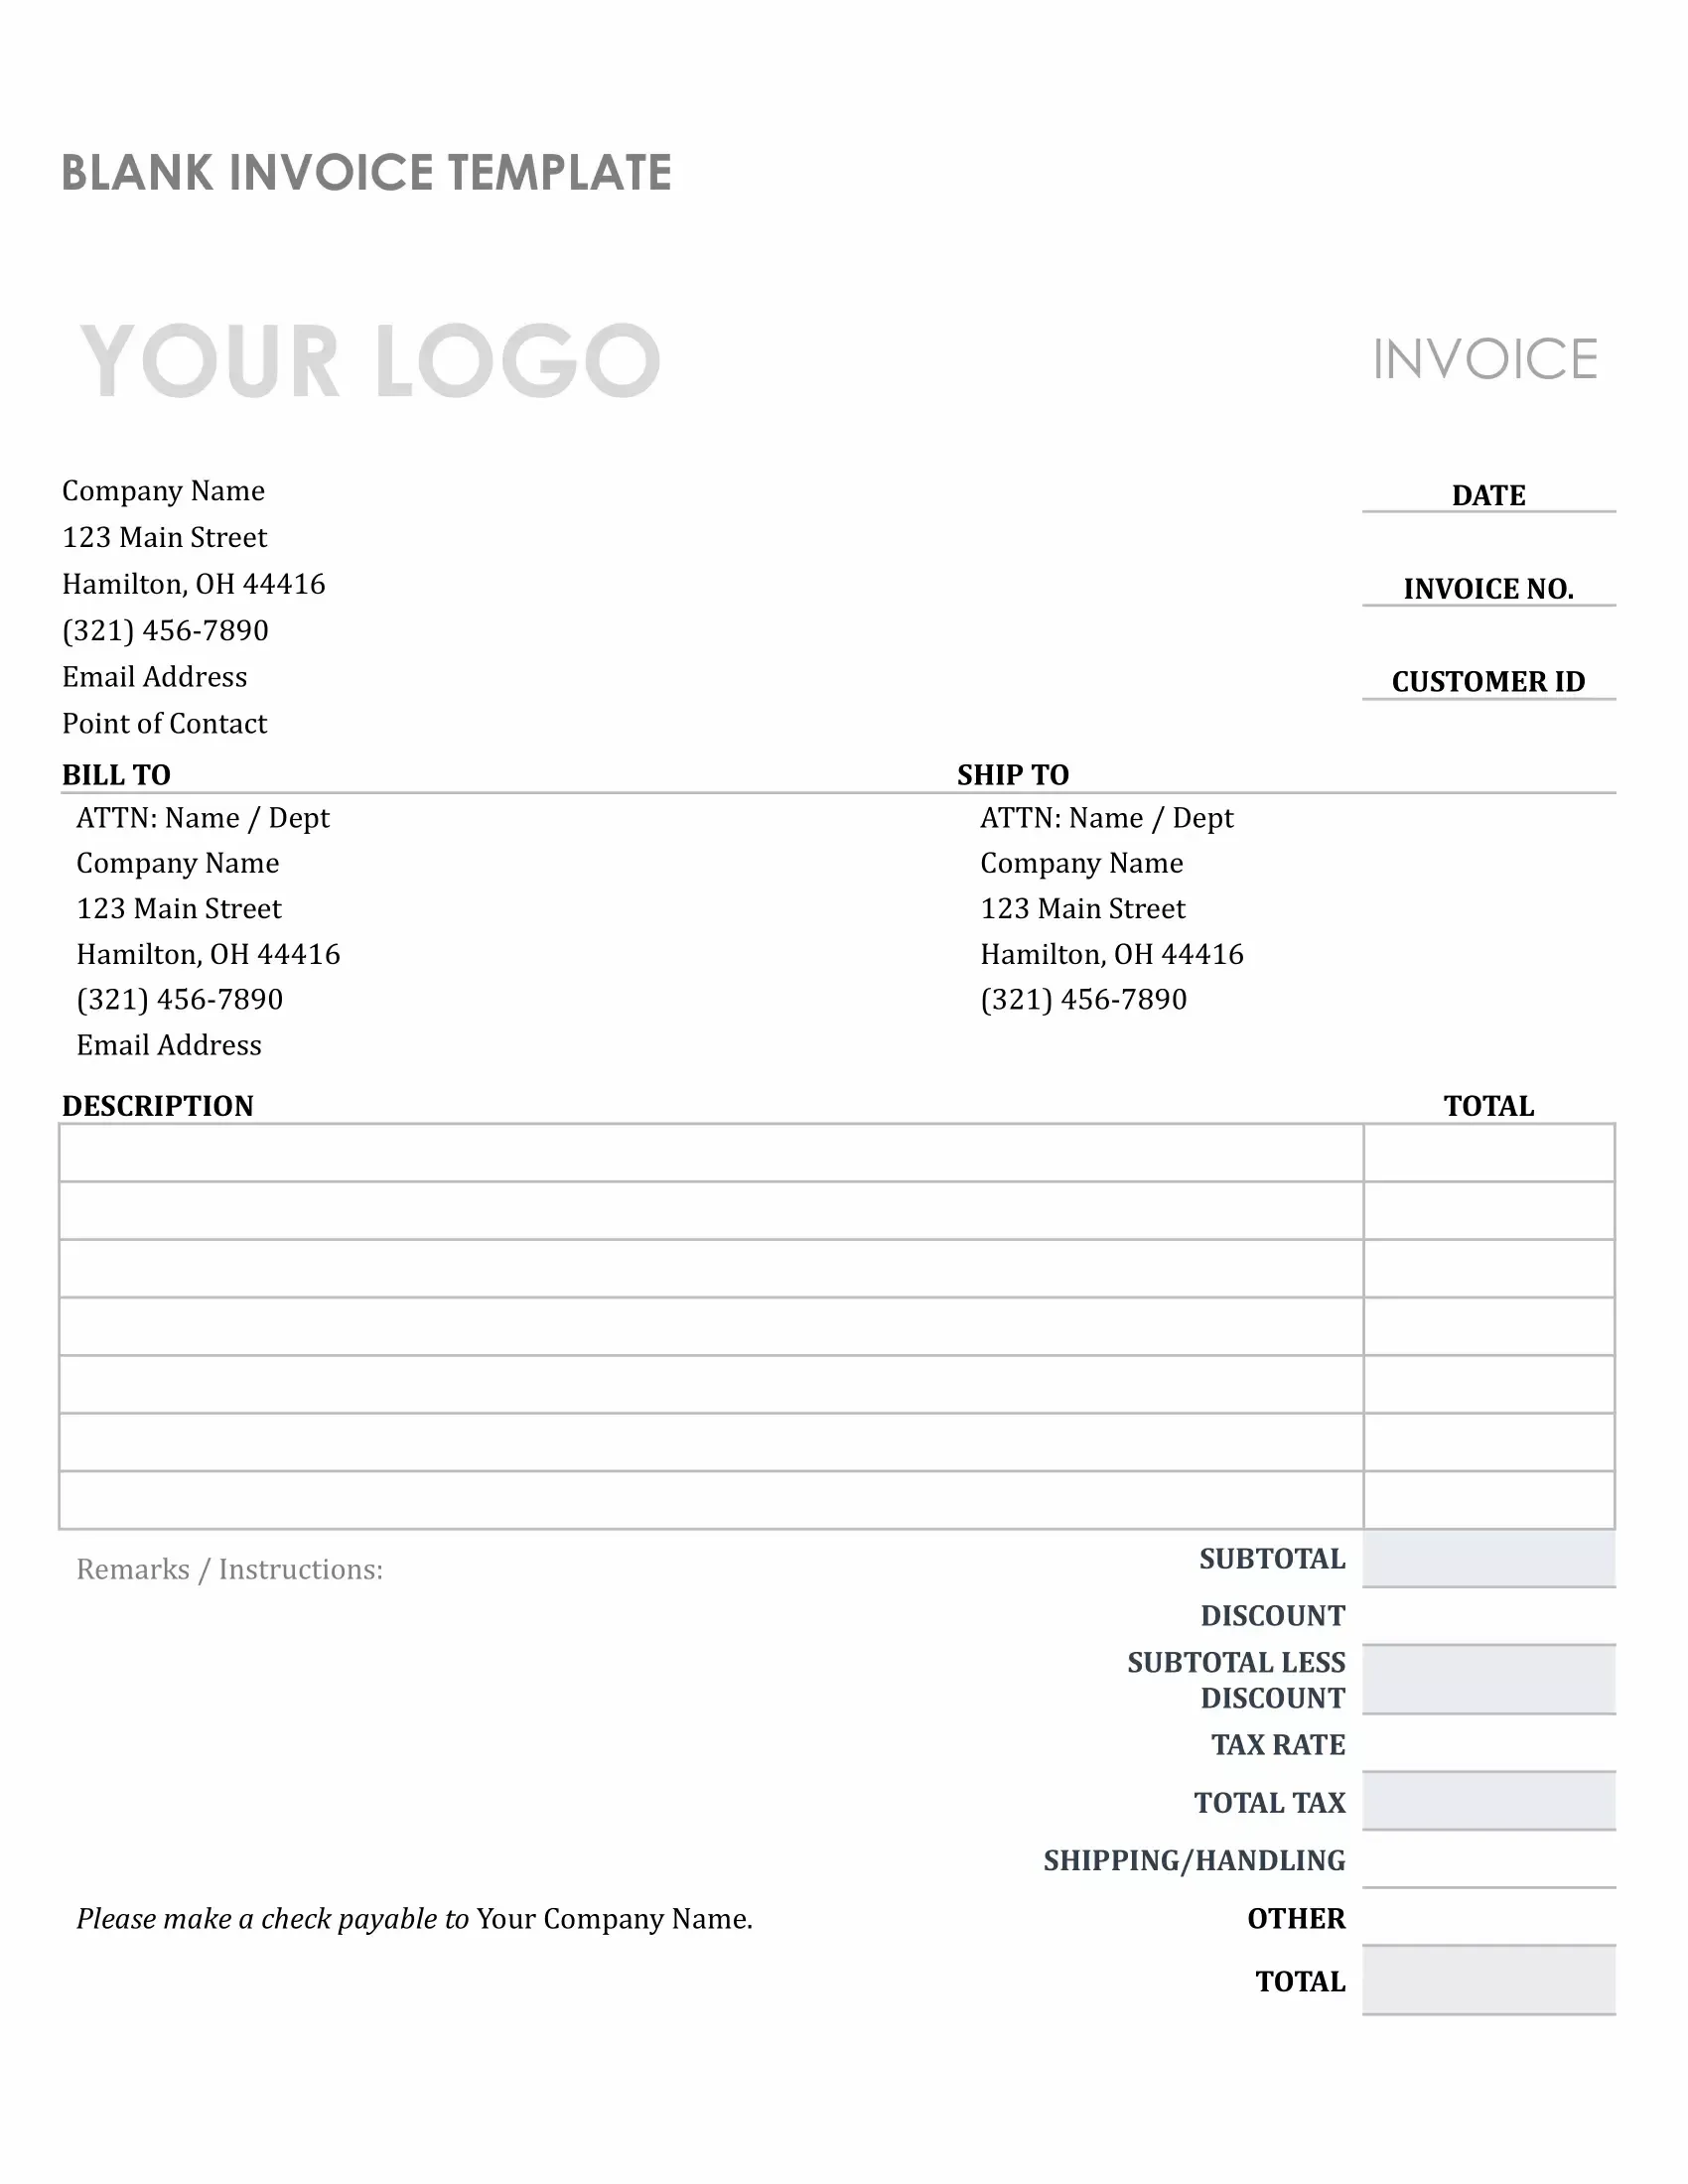 Invoice Template in Word